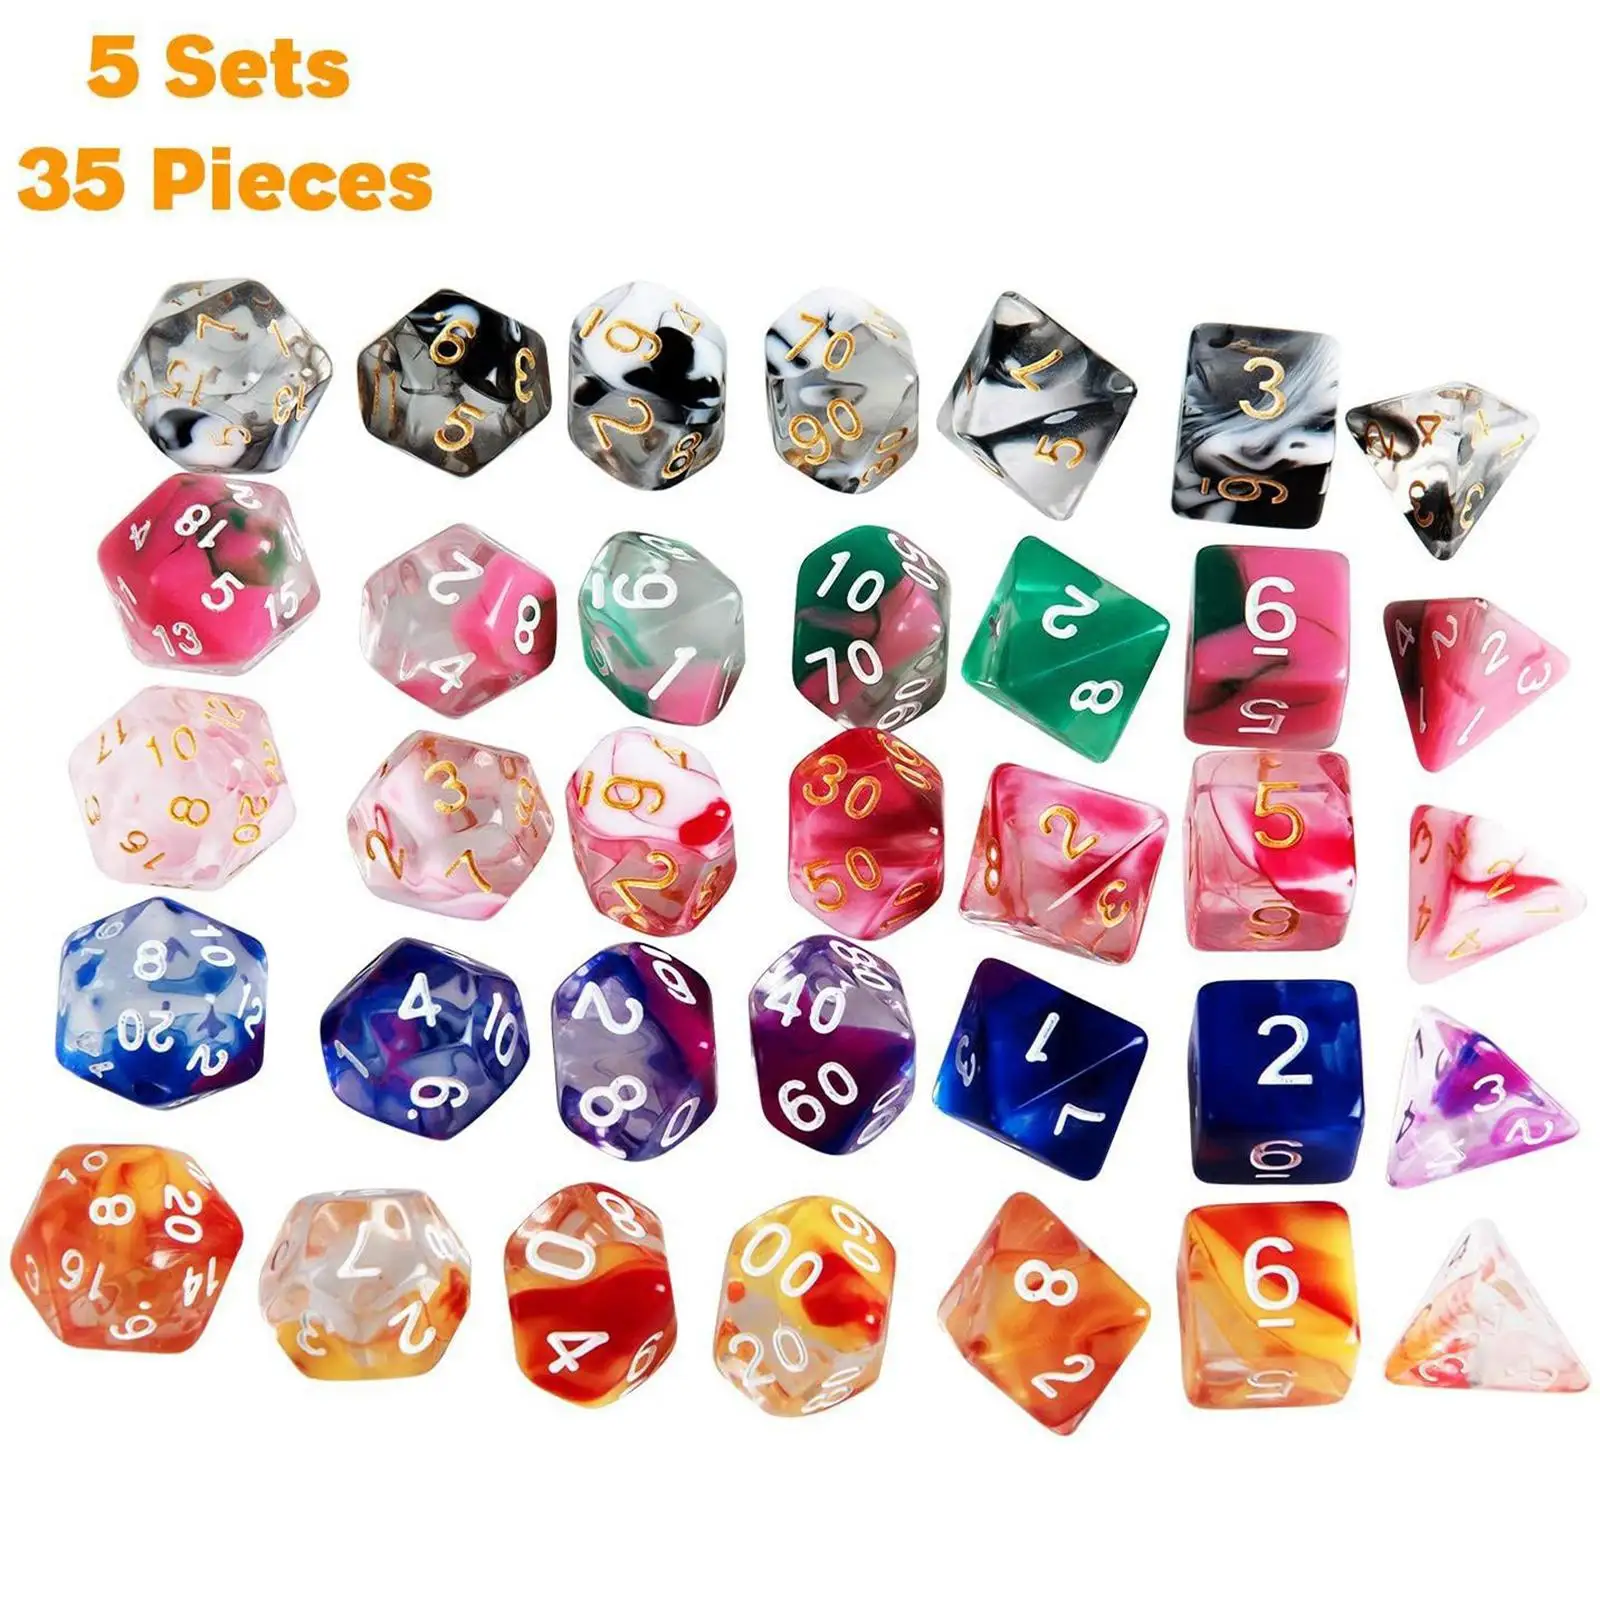 35x Polyhedral Dices Set Entertainment Toys for Card Games Math Teaching